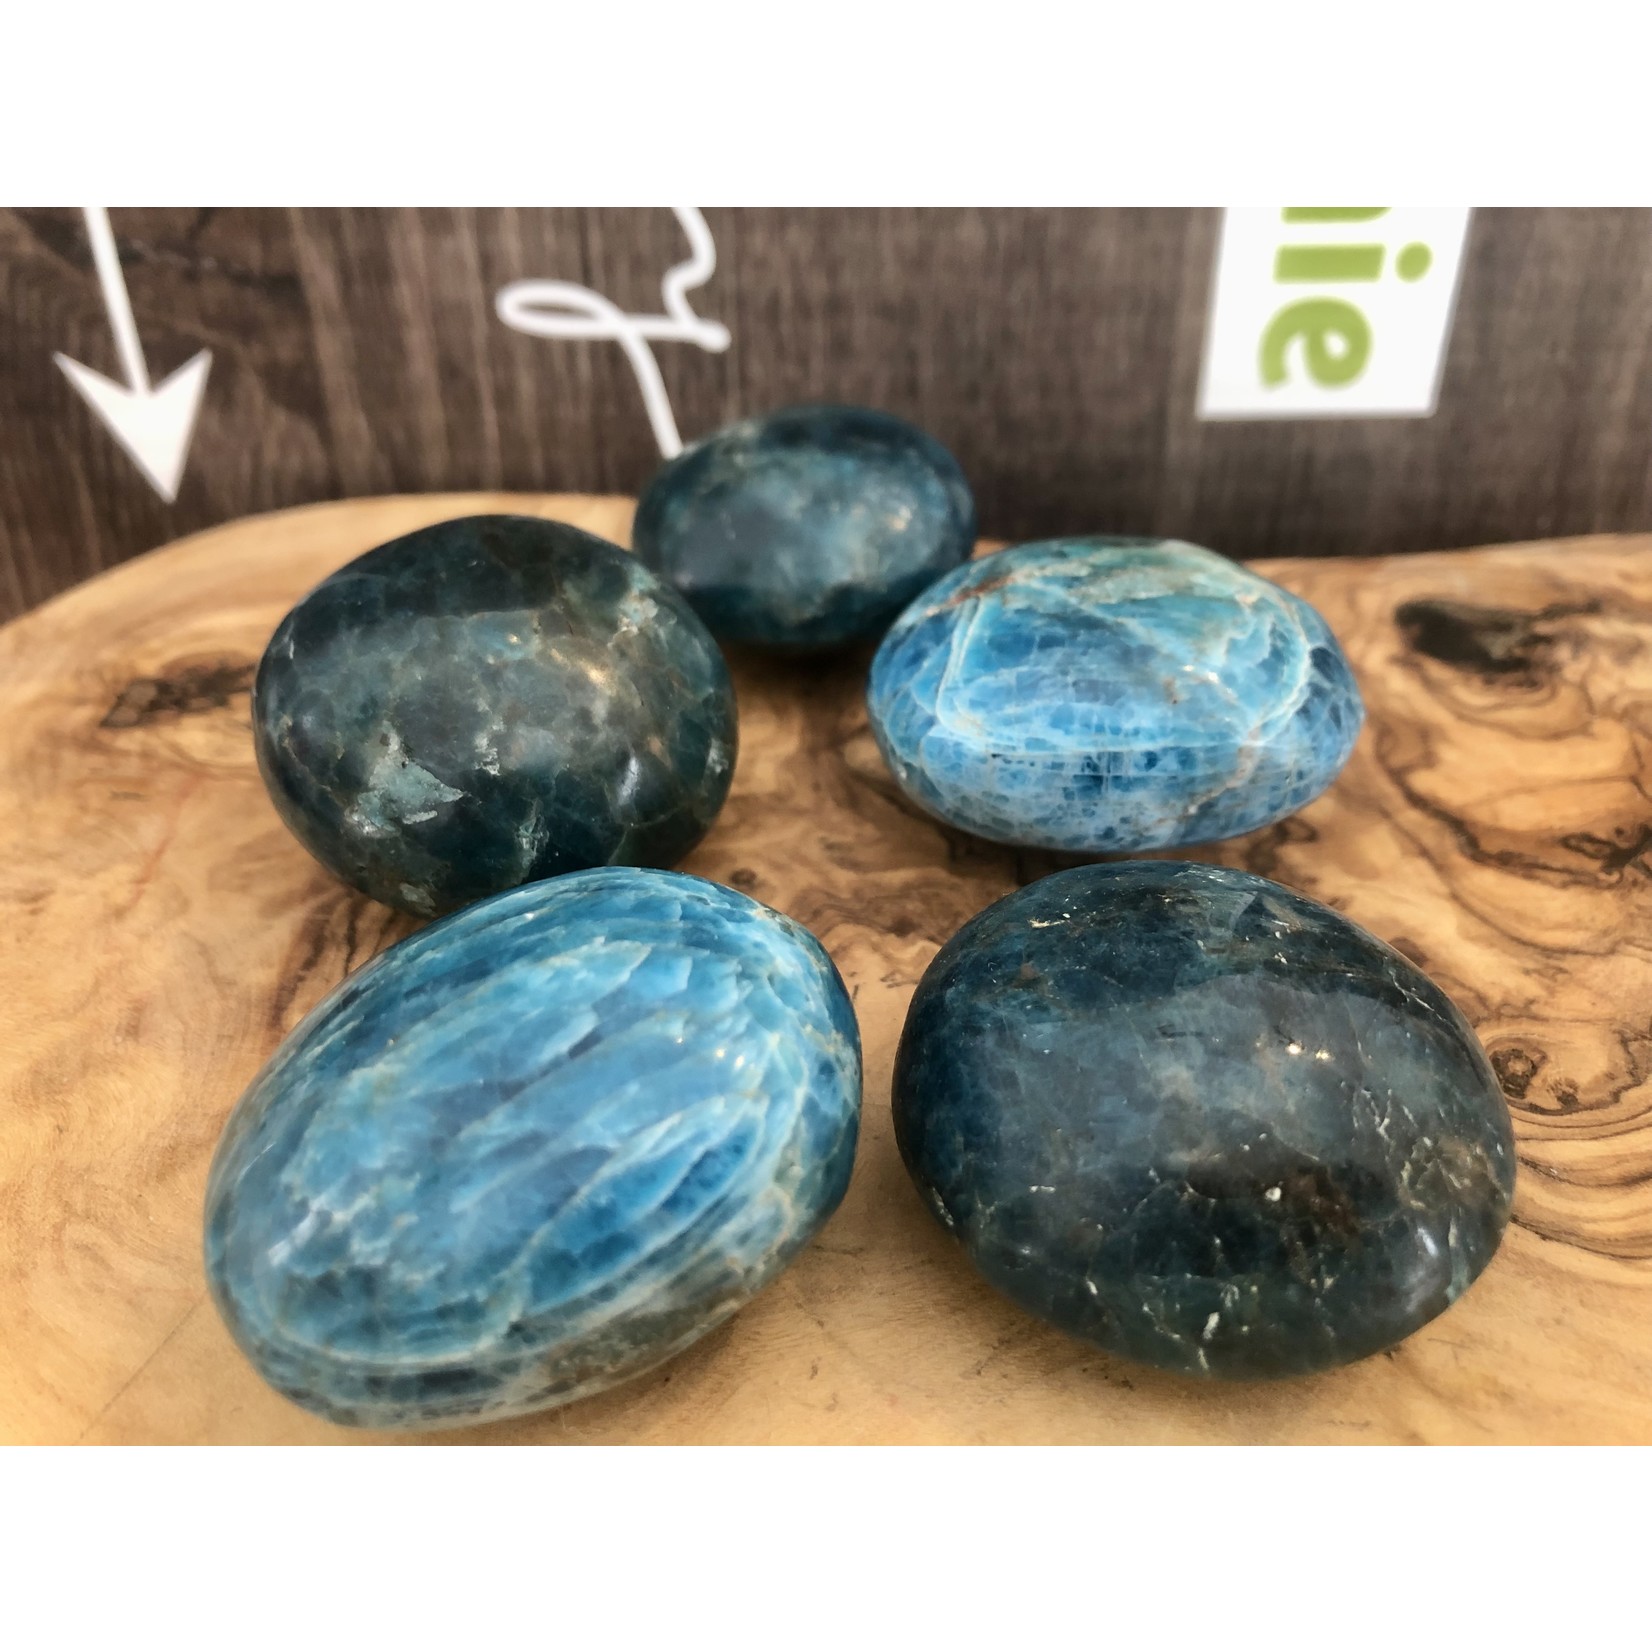 large apatite tumbled stone, choice of dark or light color, used to facilitate communication and self-expression